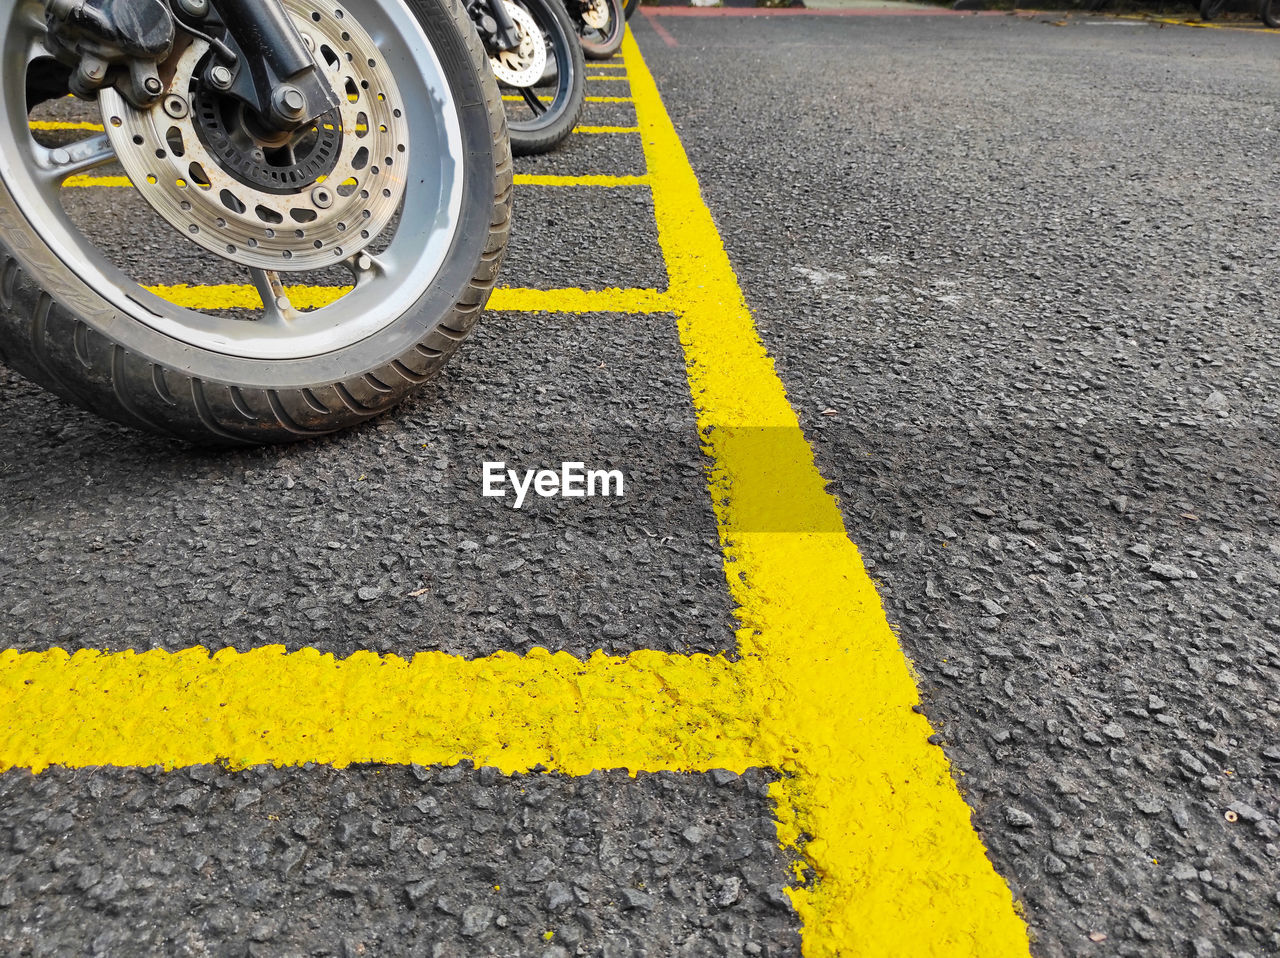 transportation, road, yellow, road marking, asphalt, symbol, marking, sign, mode of transportation, street, city, tarmac, road surface, day, tire, wheel, lane, vehicle, no people, double yellow line, land vehicle, outdoors, motor vehicle, auto part, high angle view, communication, dividing line, car, bicycle